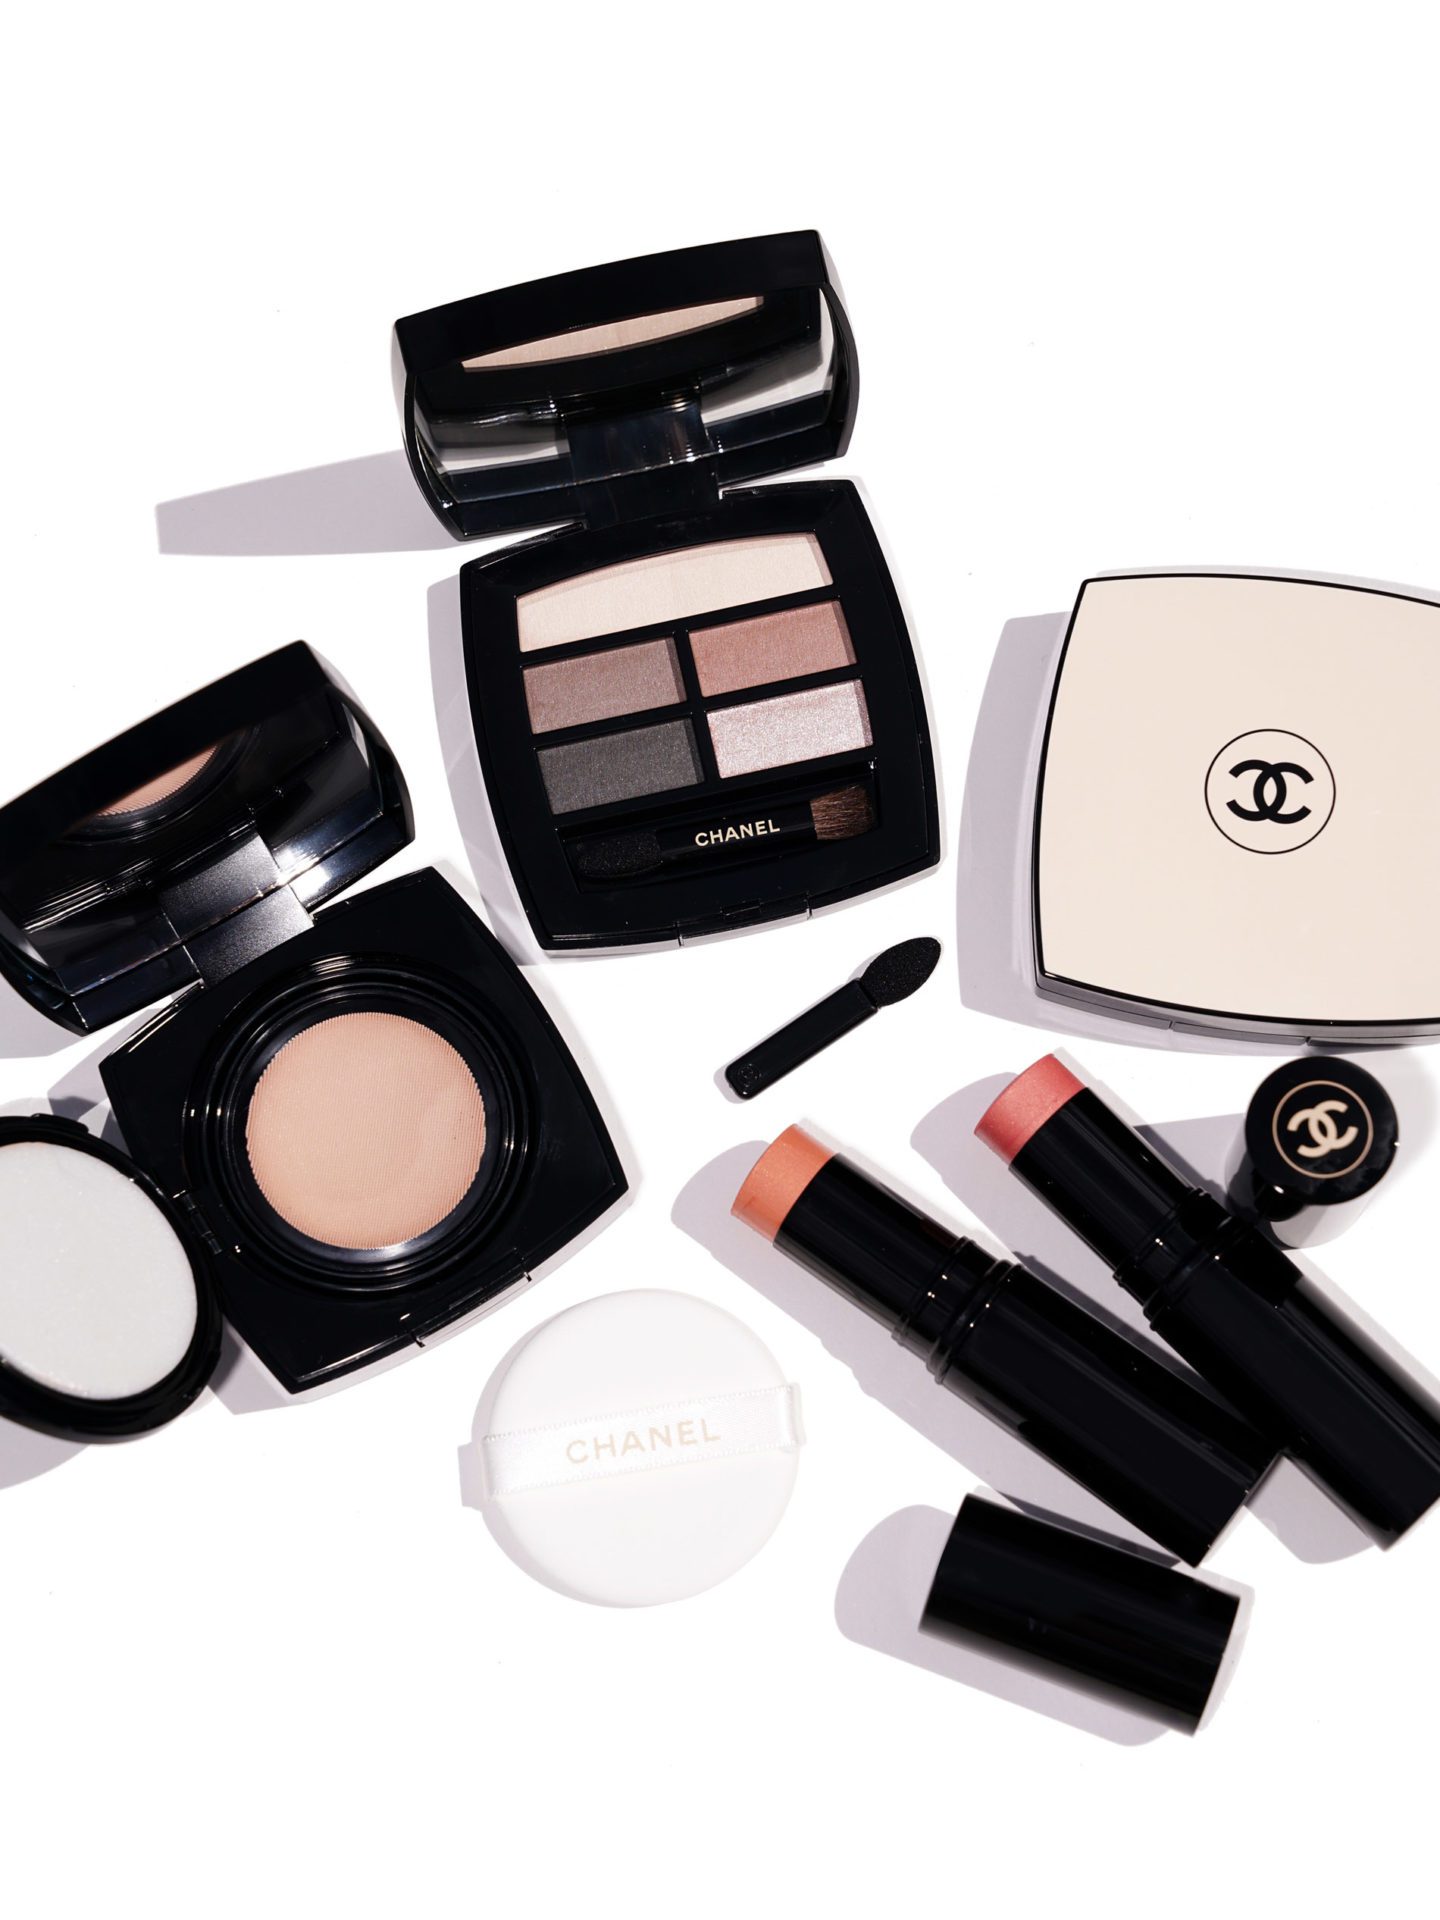 Chanel Les Beiges Collection Summer 2017 | The Beauty Look Book